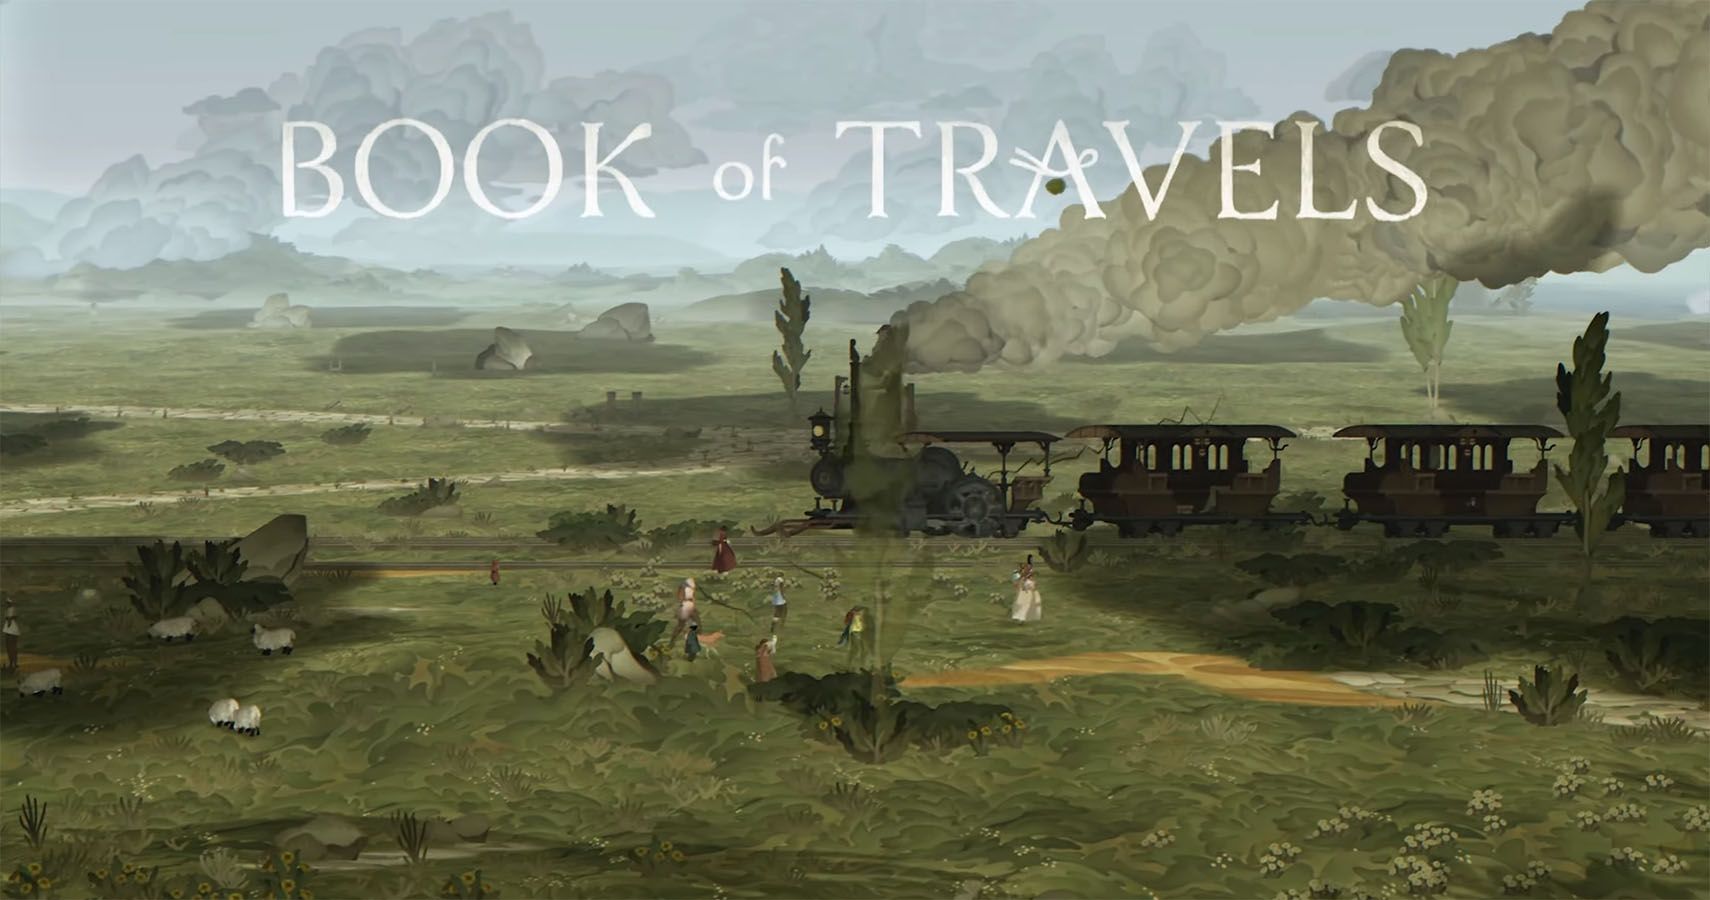 the book of travels summary sparknotes